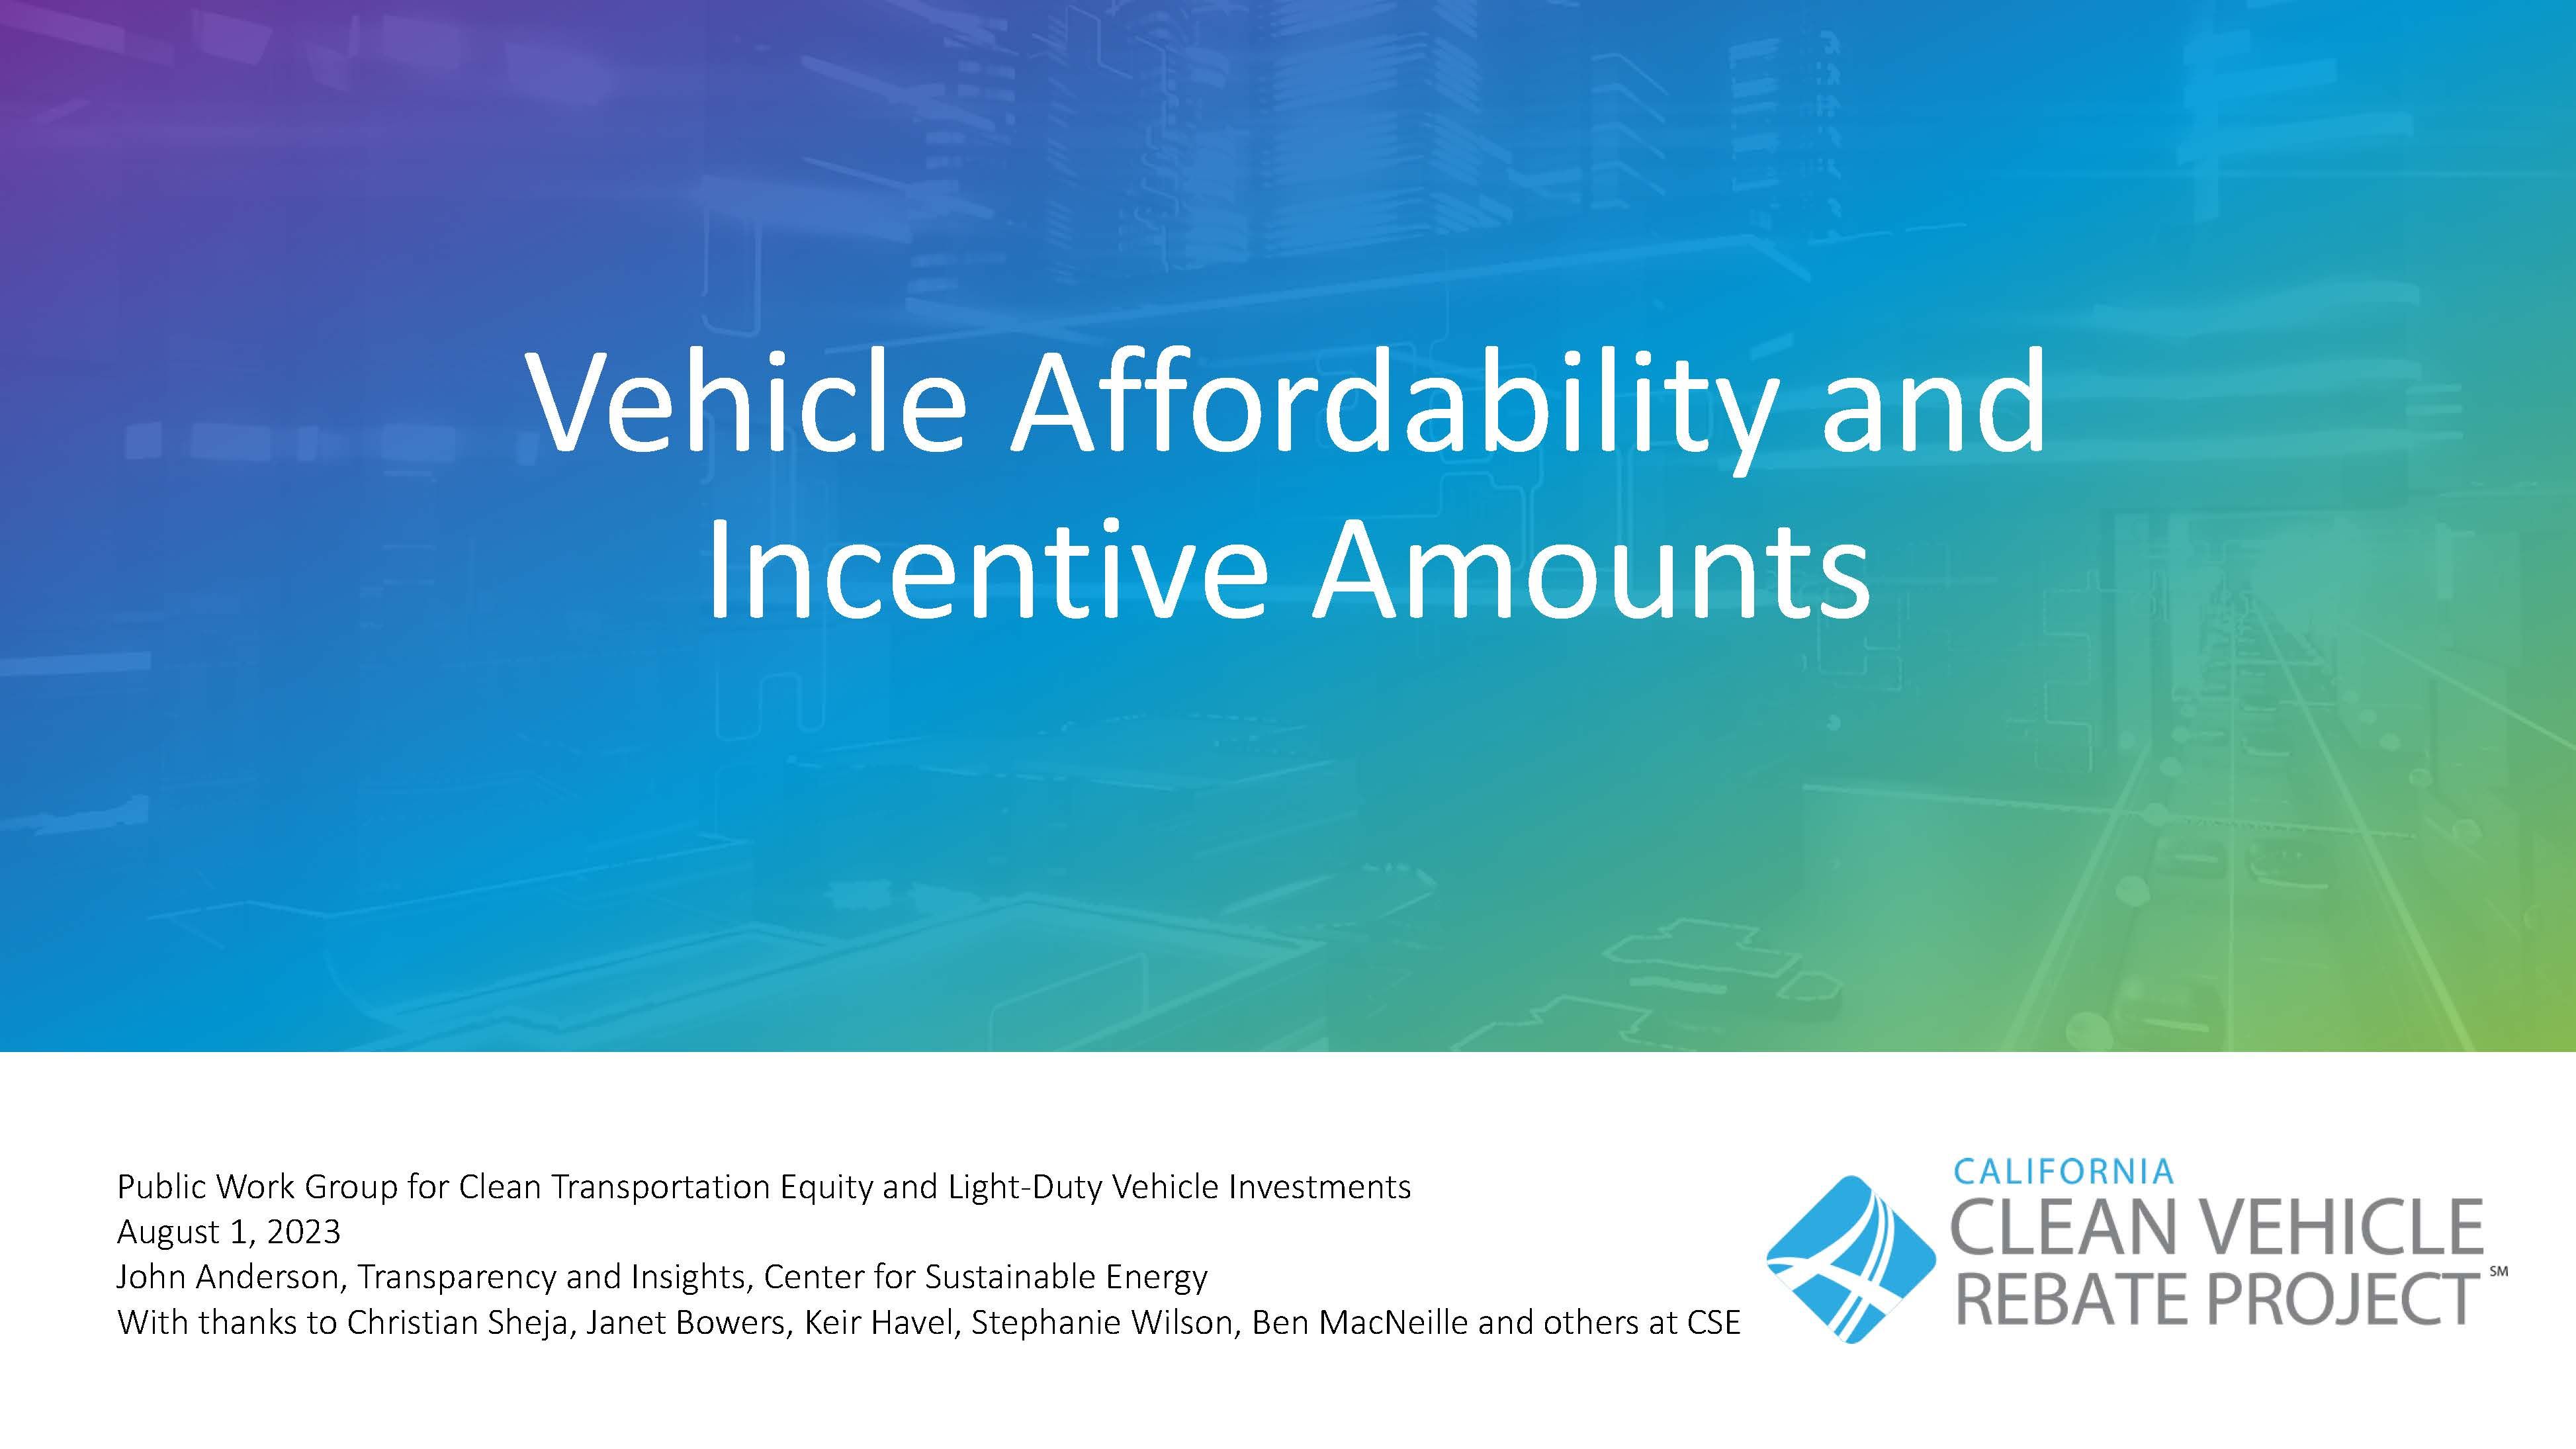 Vehicle Affordability and Incentive Amounts